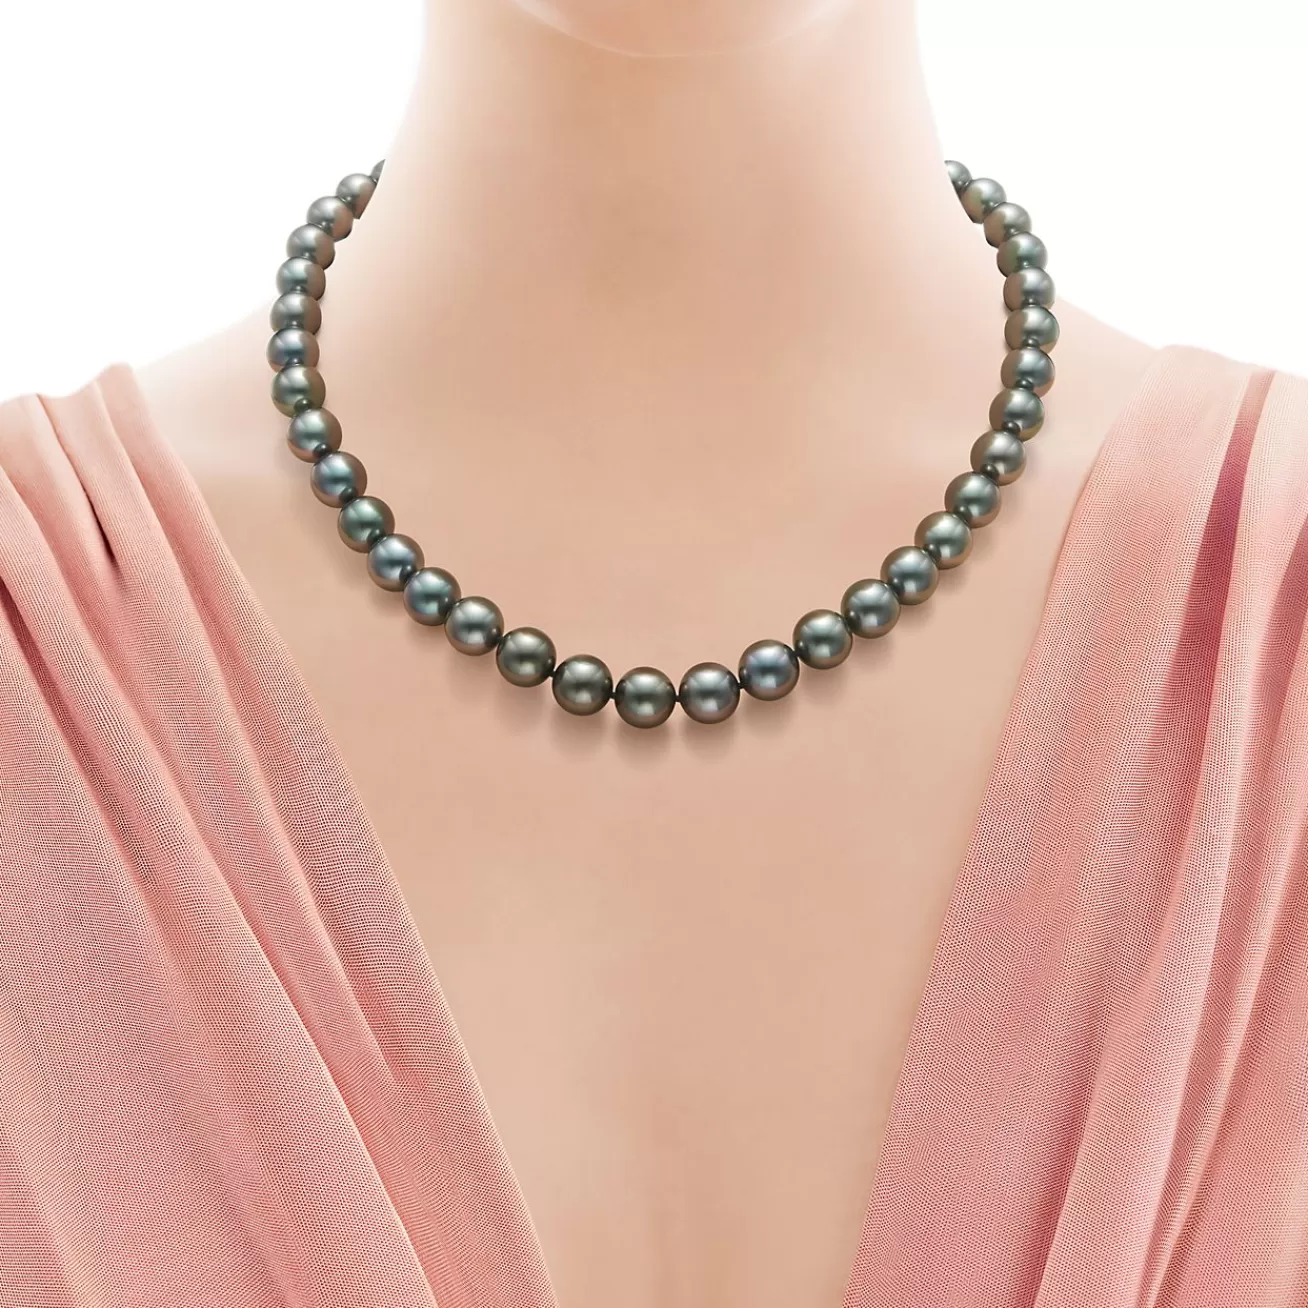 Tiffany & Co. Necklace of Tahitian pearls with 18k white gold. | ^ Necklaces & Pendants | Pearl Jewelry